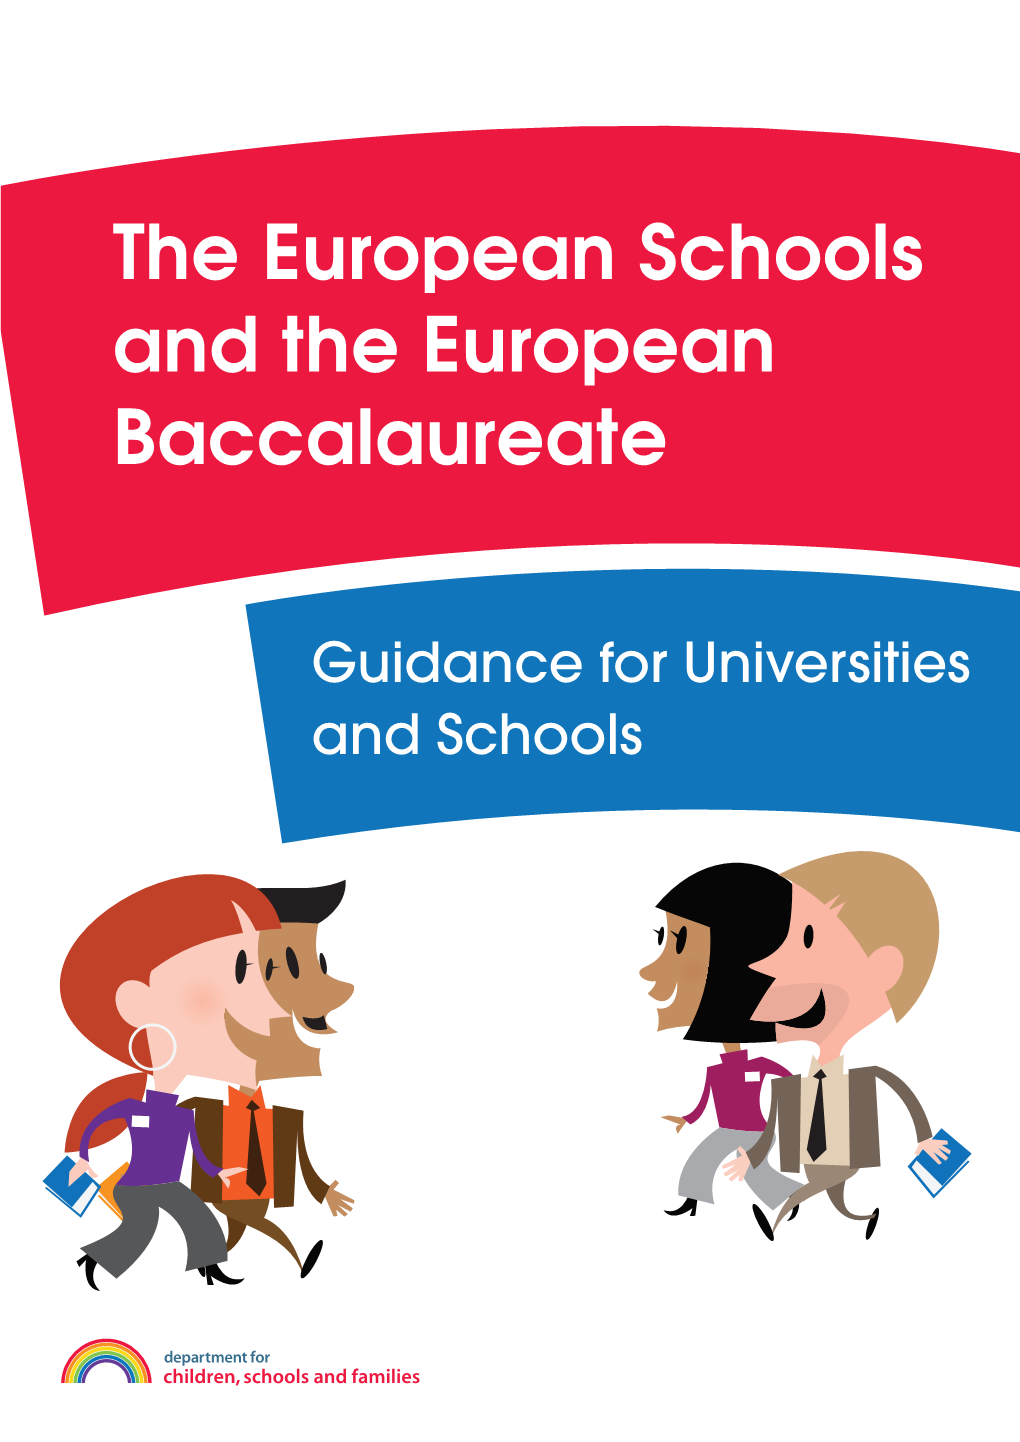 The European Schools and the European Baccalaureate